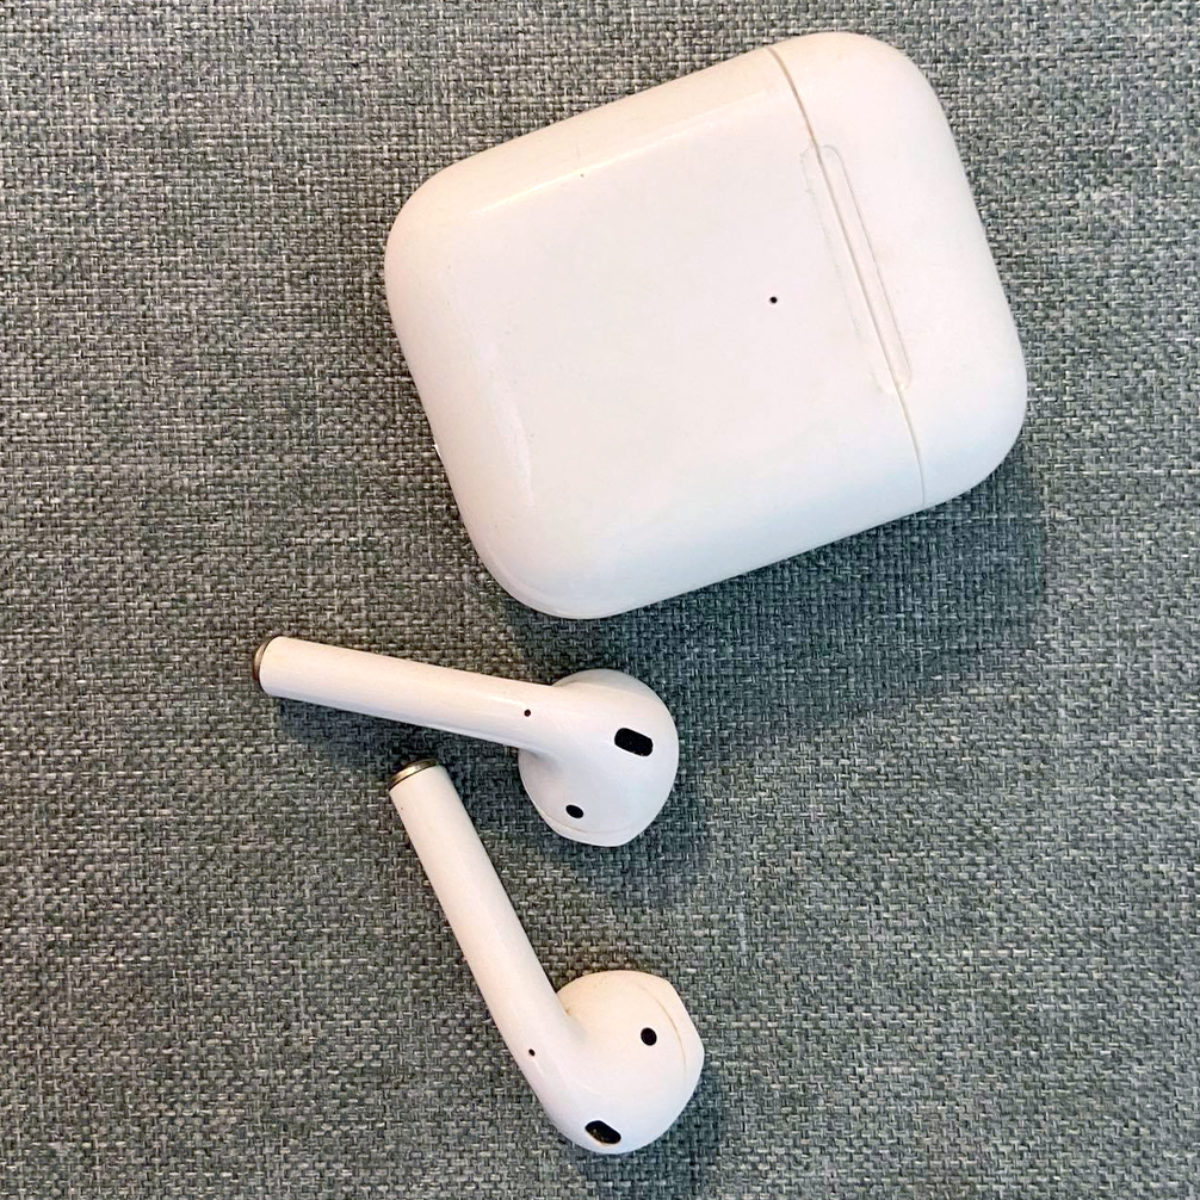 Gaming Airpods – How Will They Fare as Gaming Earbuds? - Headphonesty